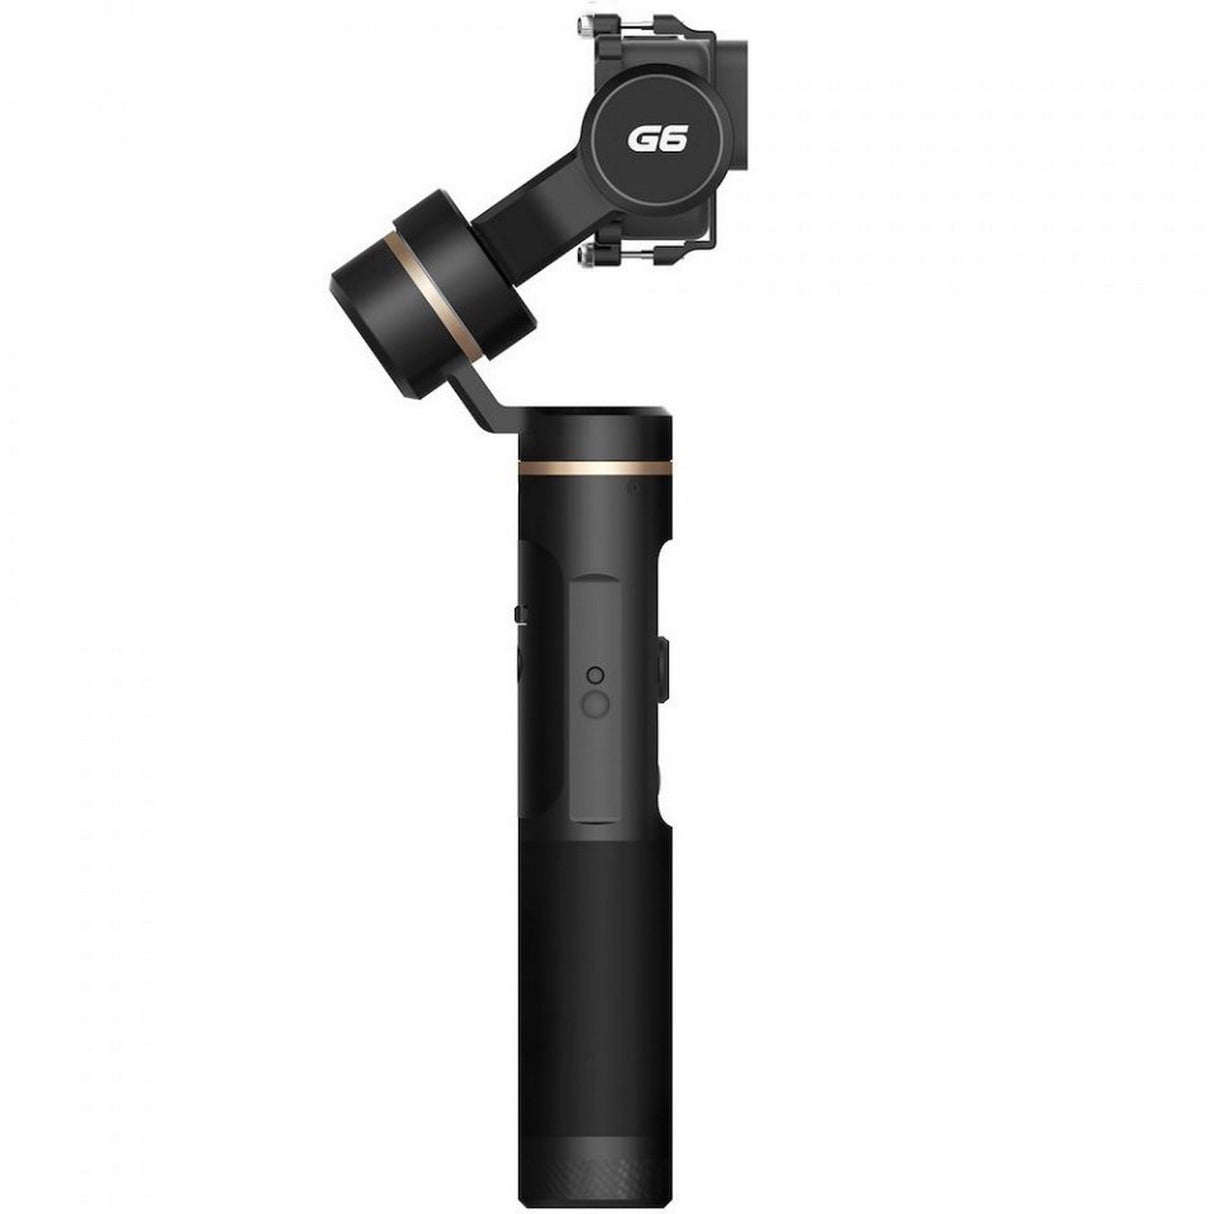 FeiyuTech G6 3-Axis Handheld Gimbal for Action Cameras